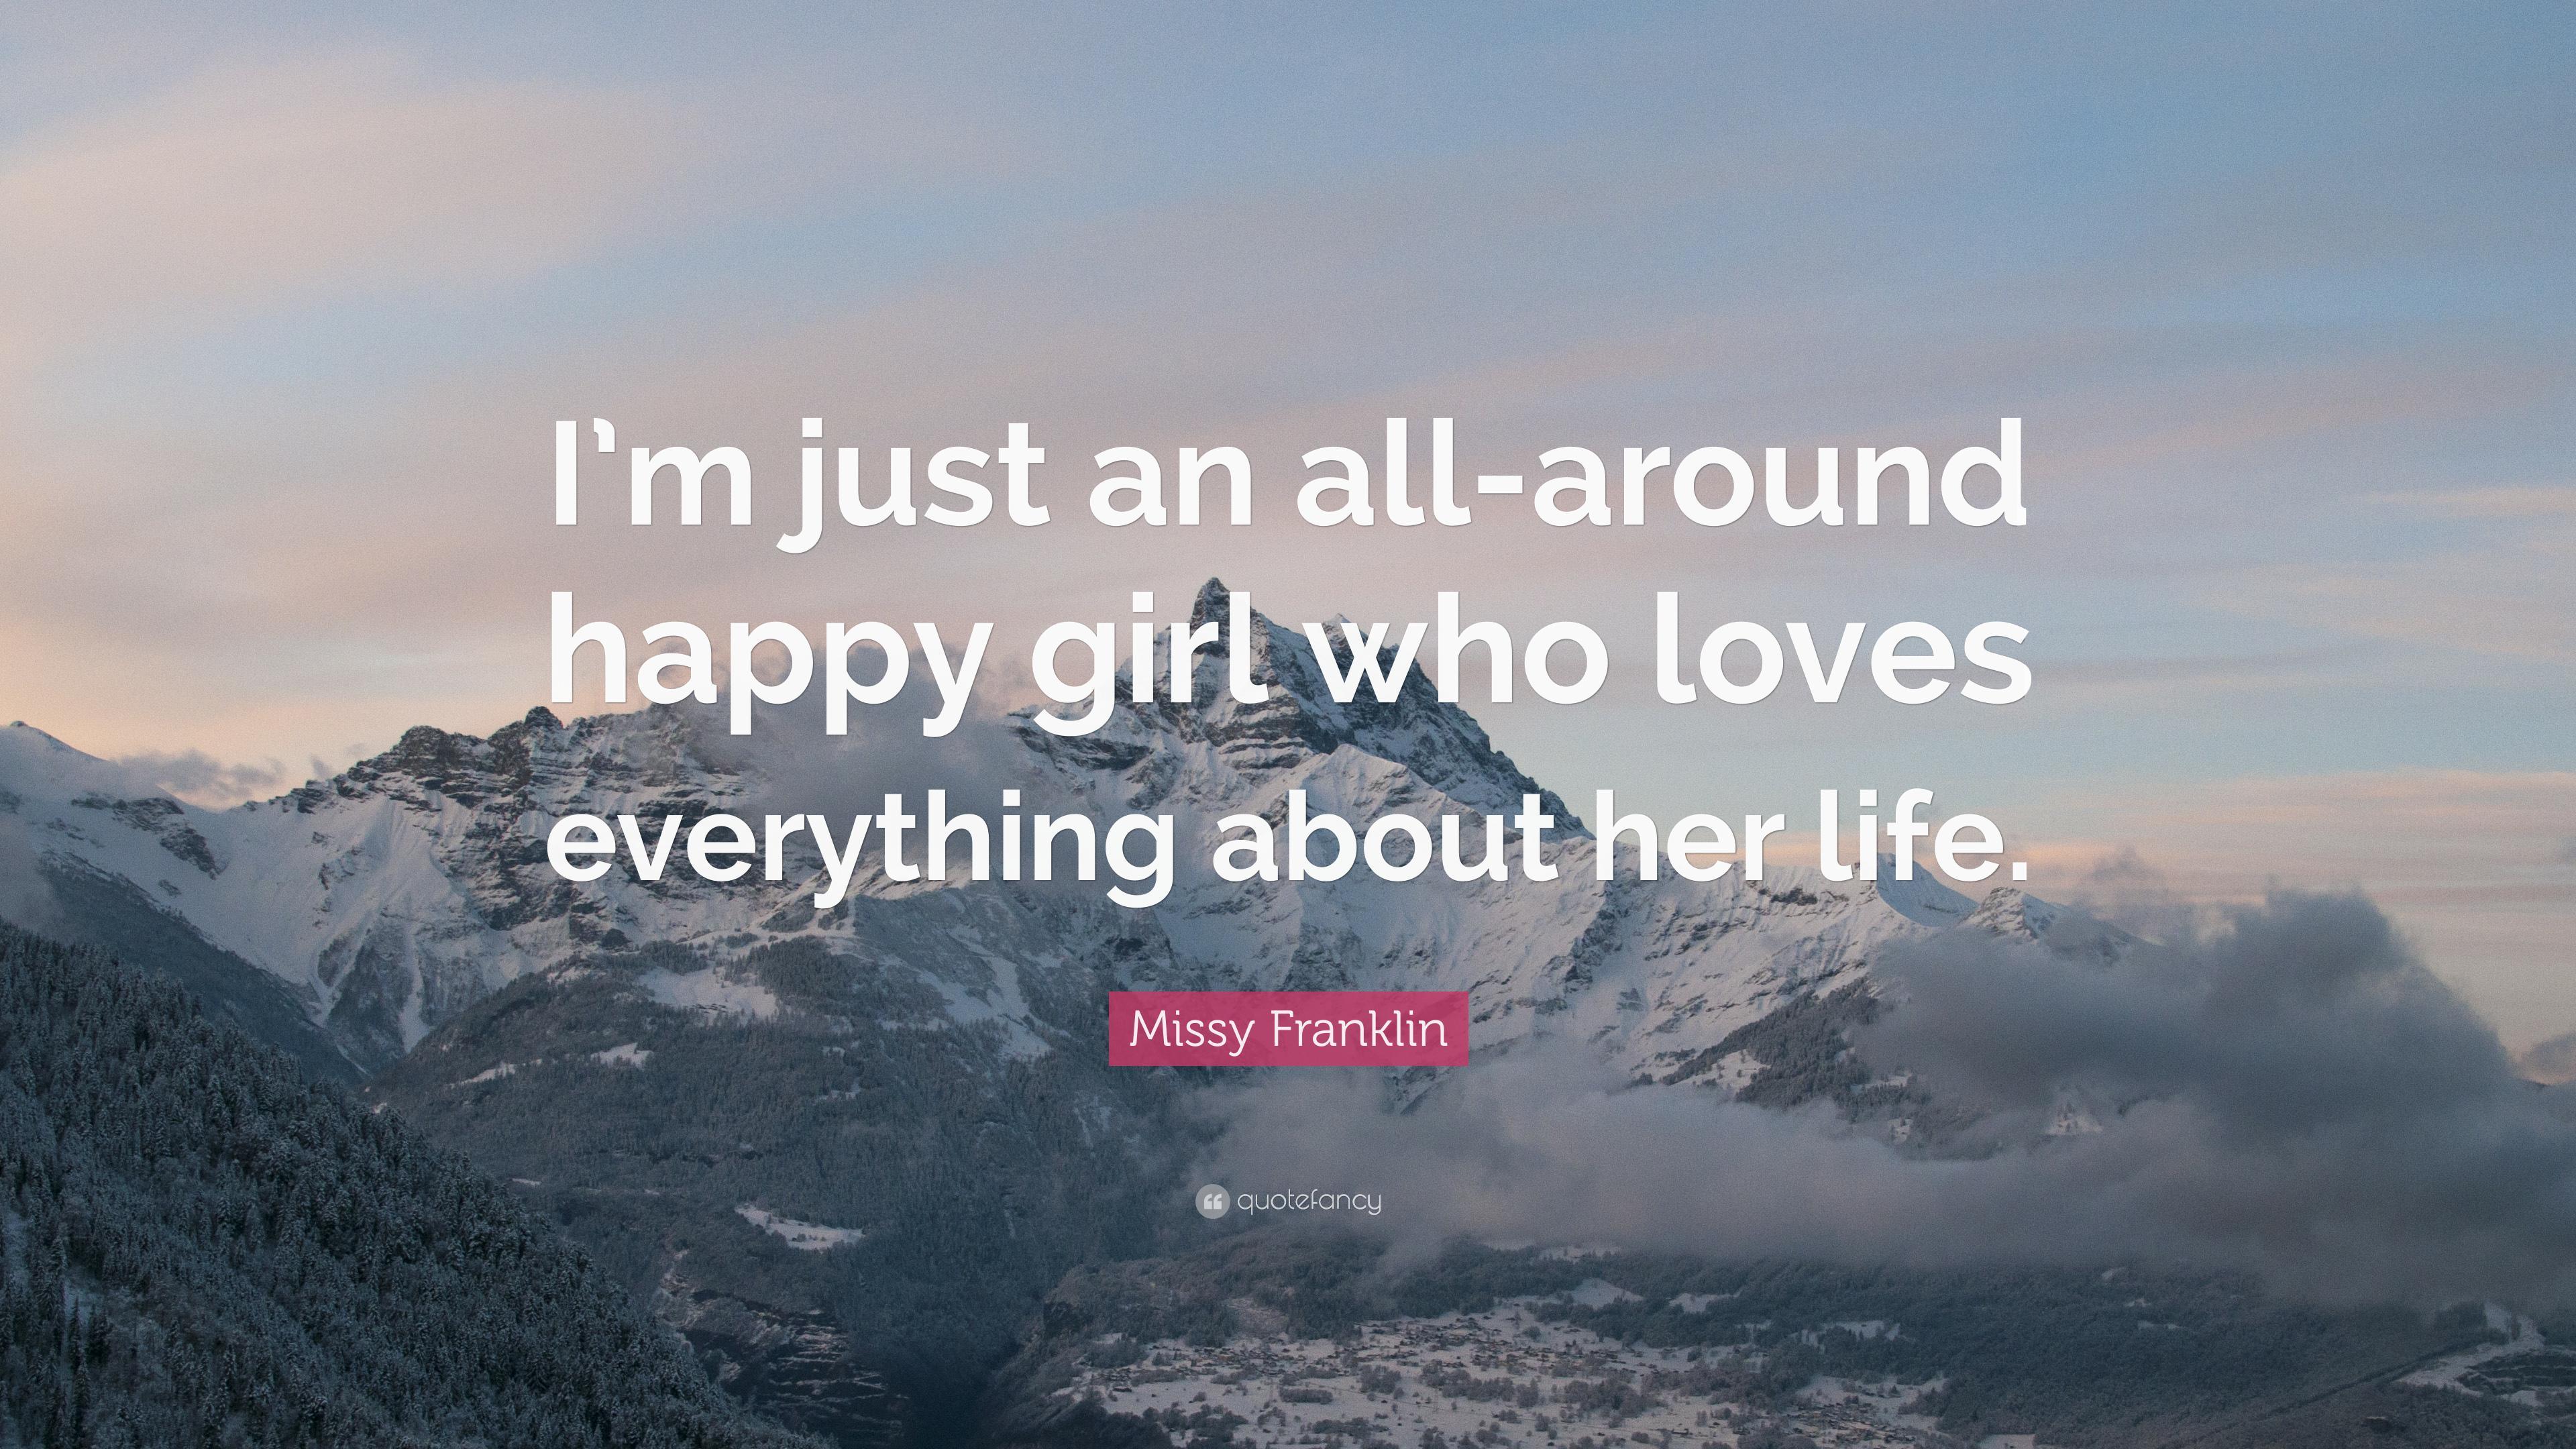 Missy Franklin Quote: “I'm Just An All Around Happy Girl Who